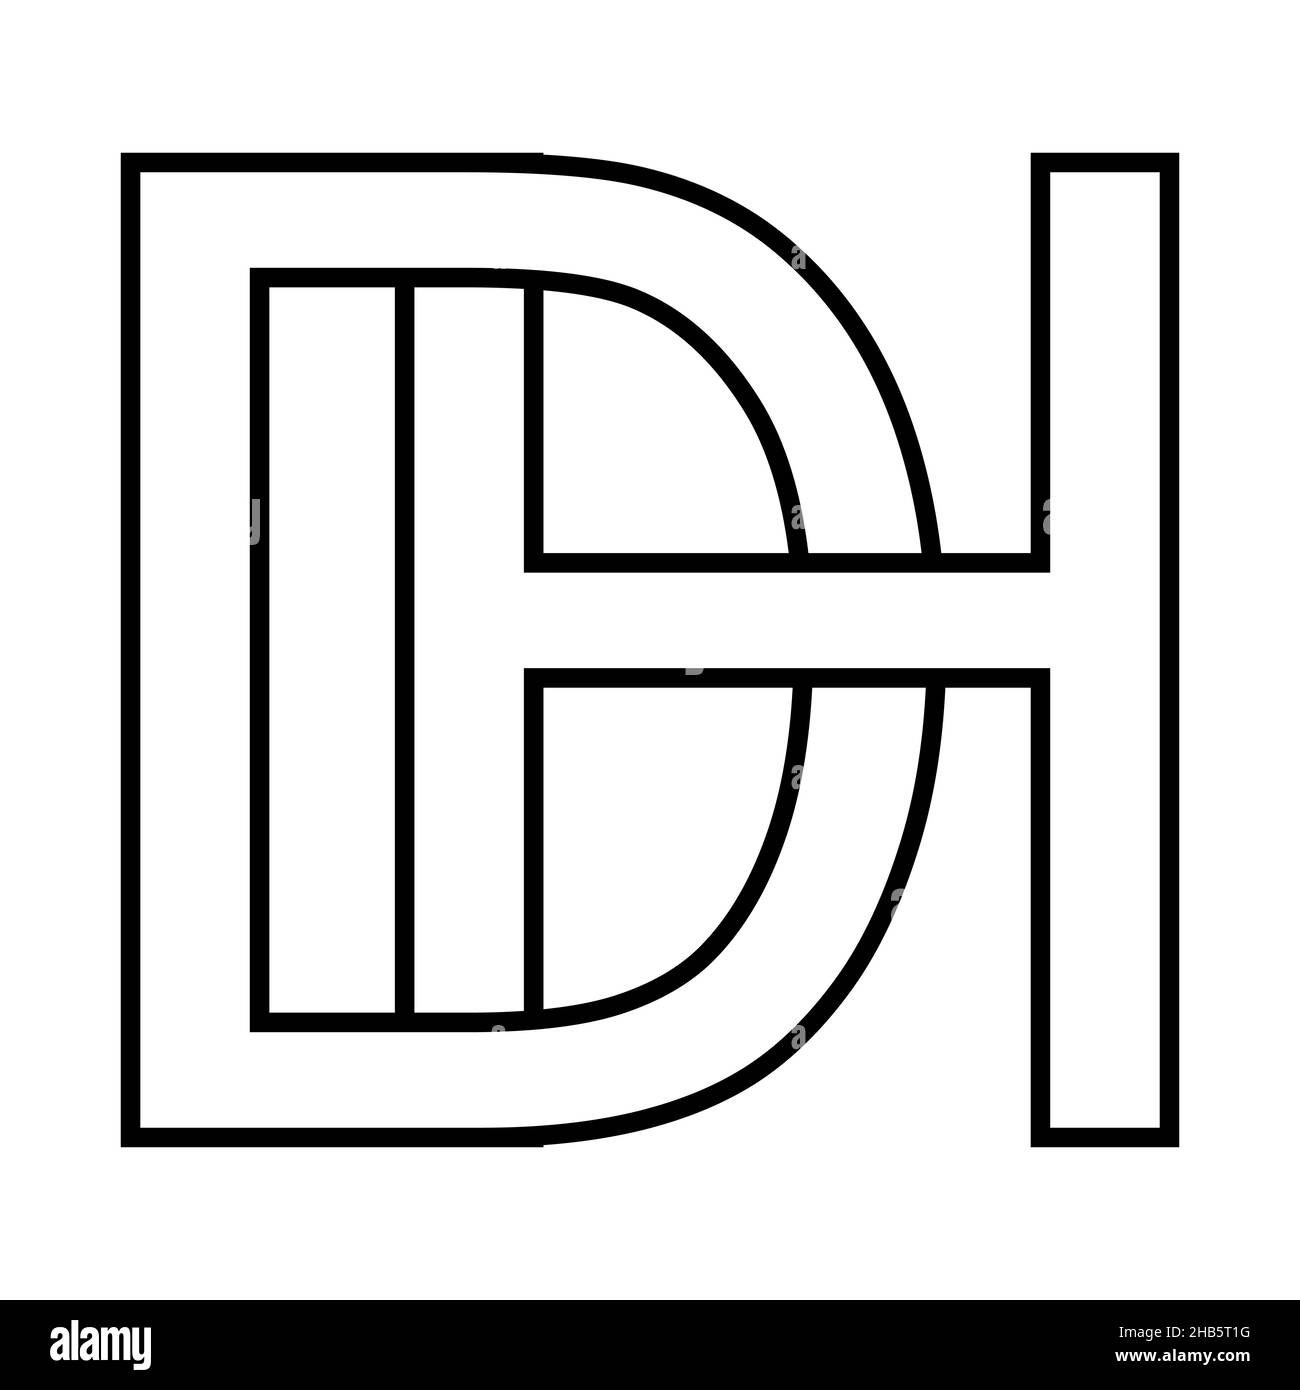 Logo sign dh hd icon sign interlaced letters d h Stock Vector